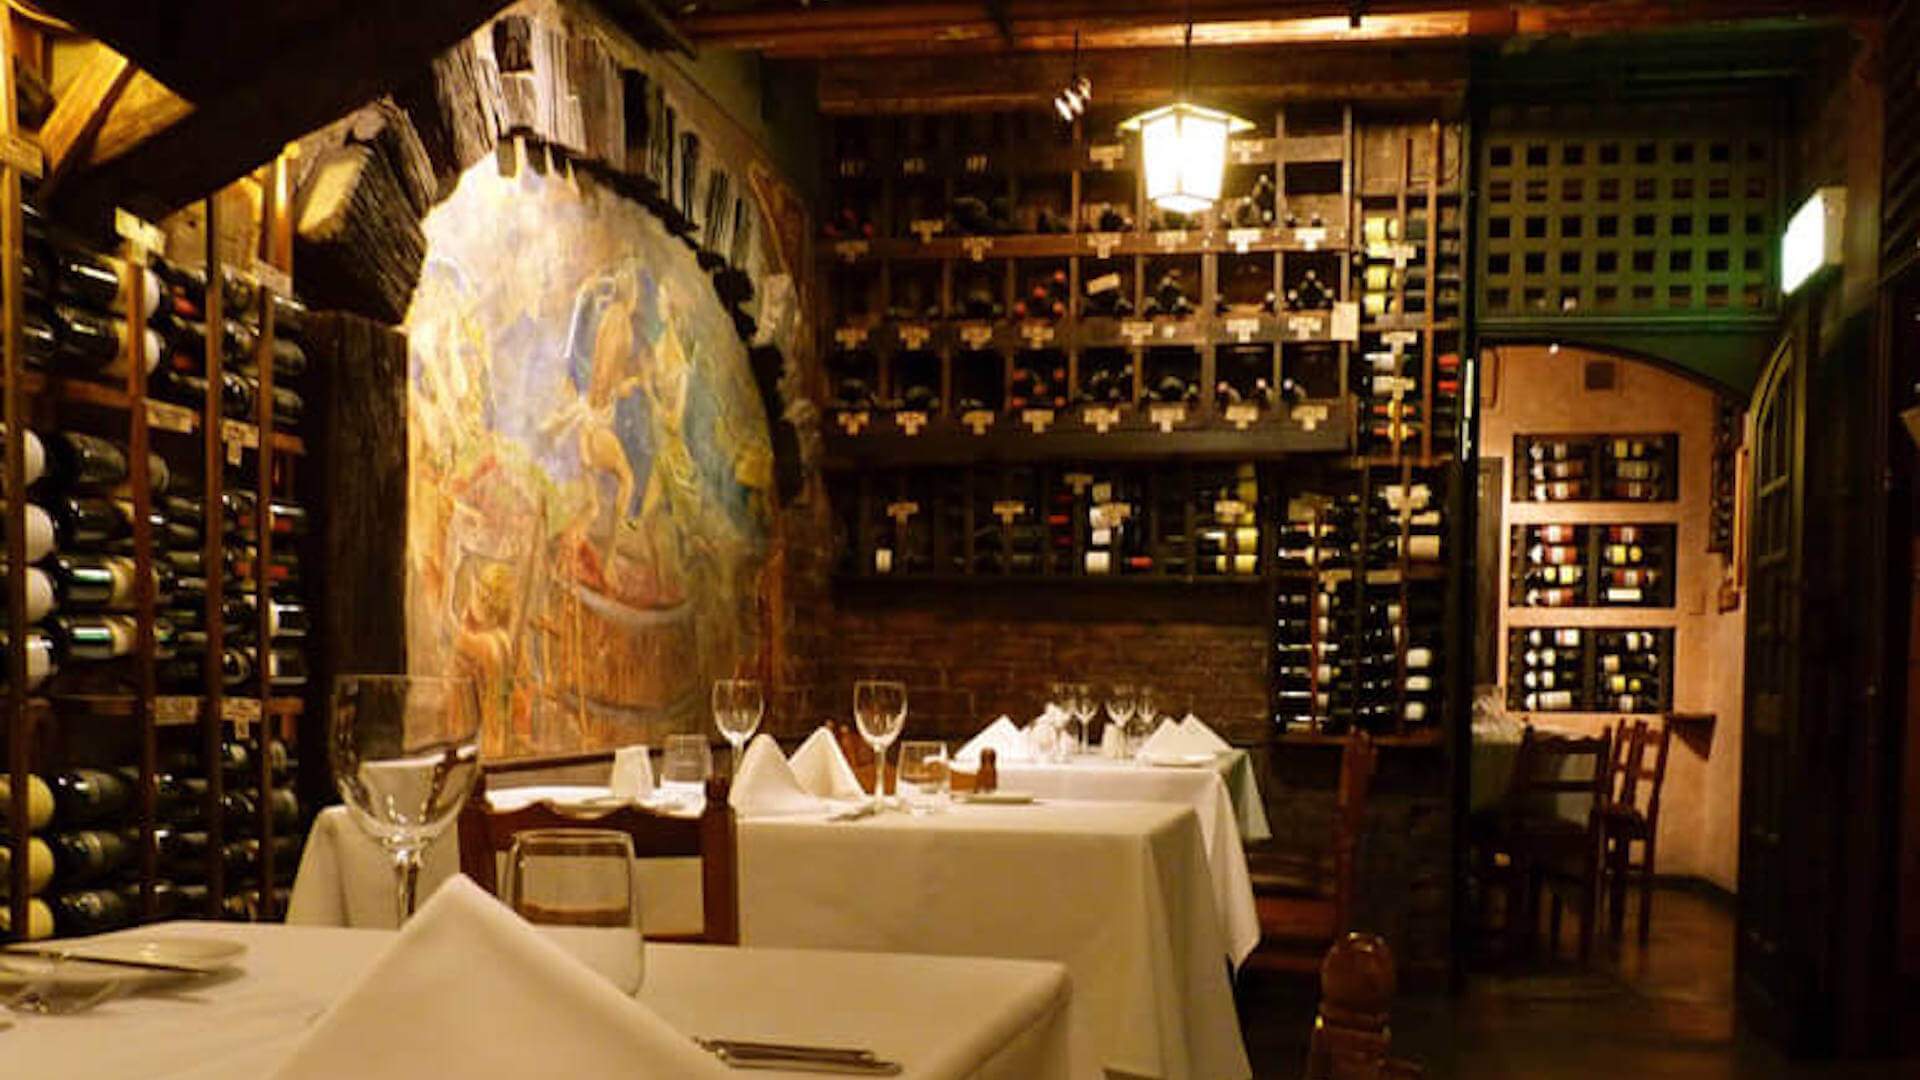 the basement cellar and private dining room at Beppi's italian restaurant - home to one of the best private dining rooms in Sydney